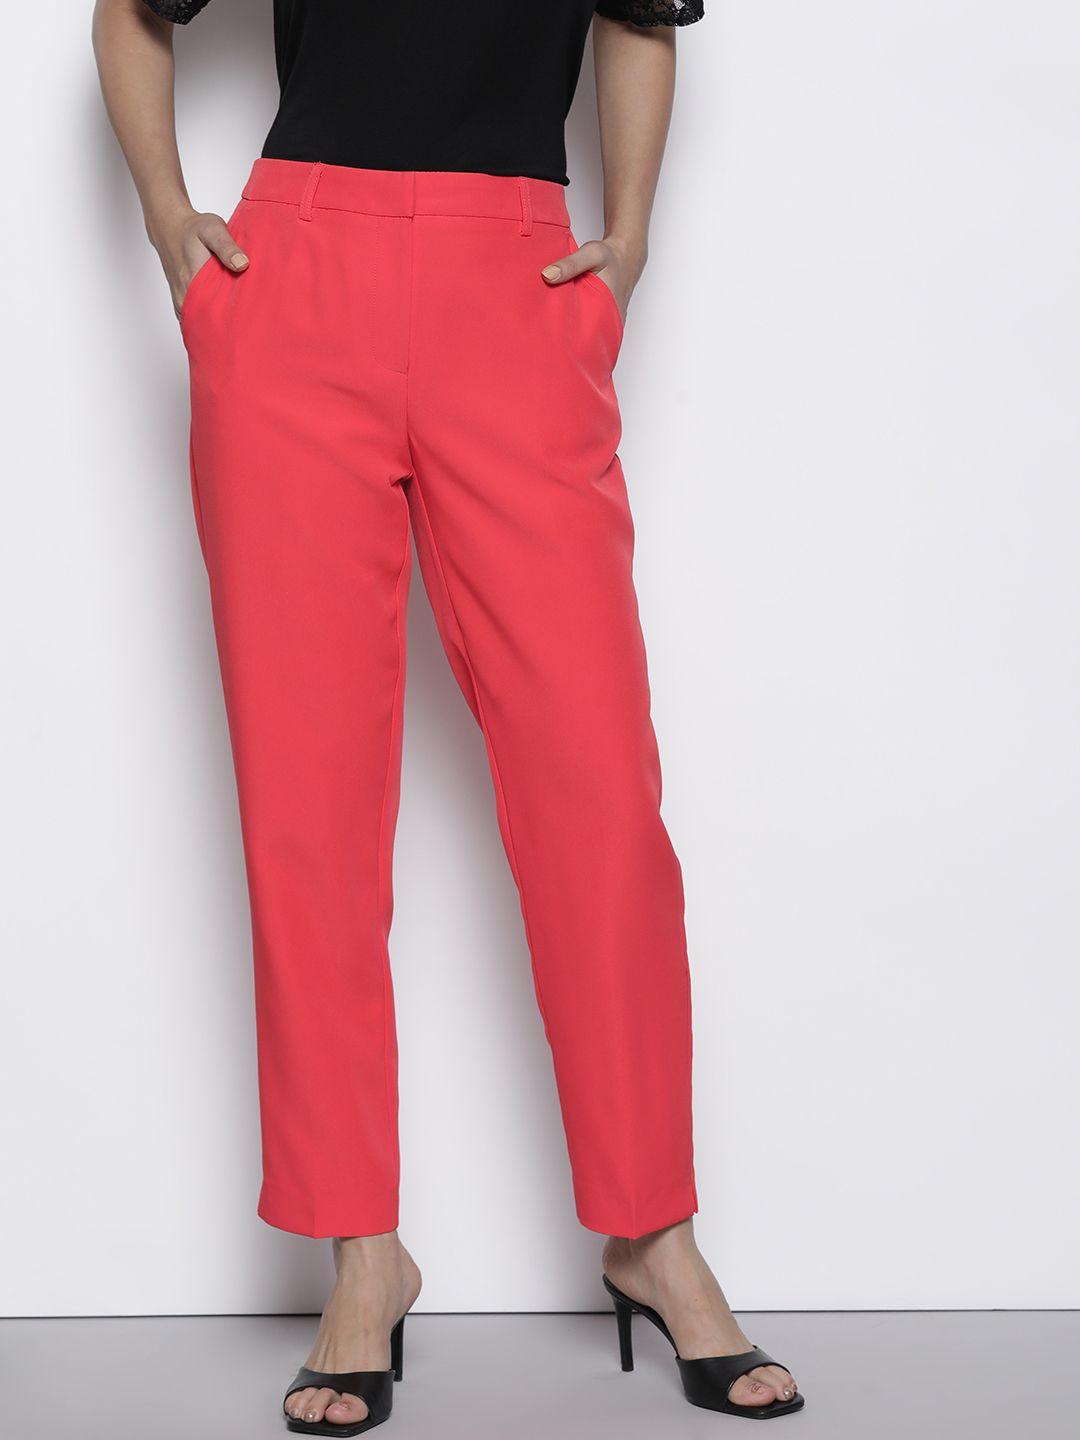 dorothy-perkins-women-ankle-length-trousers